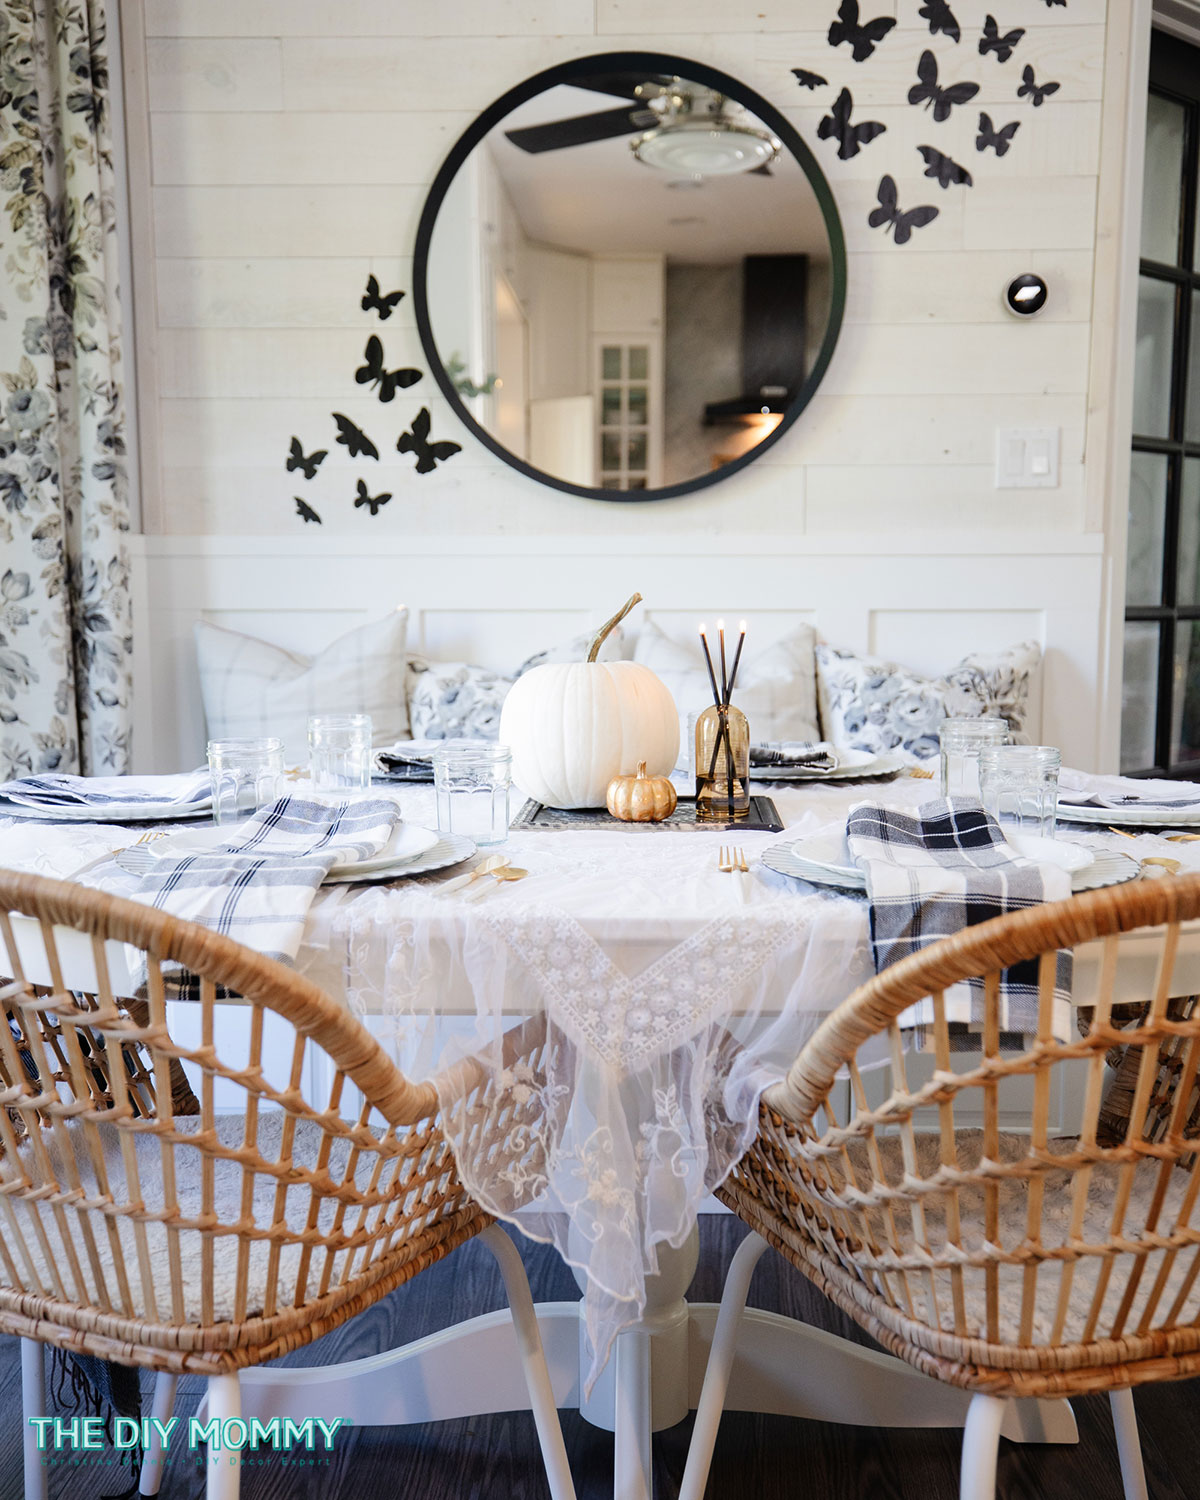 Halloween tablescape consisting of a faux white pumpkin, smaller gold pumpkin and candles.  Also featured are black and white table napkins and a white lace tablecloth